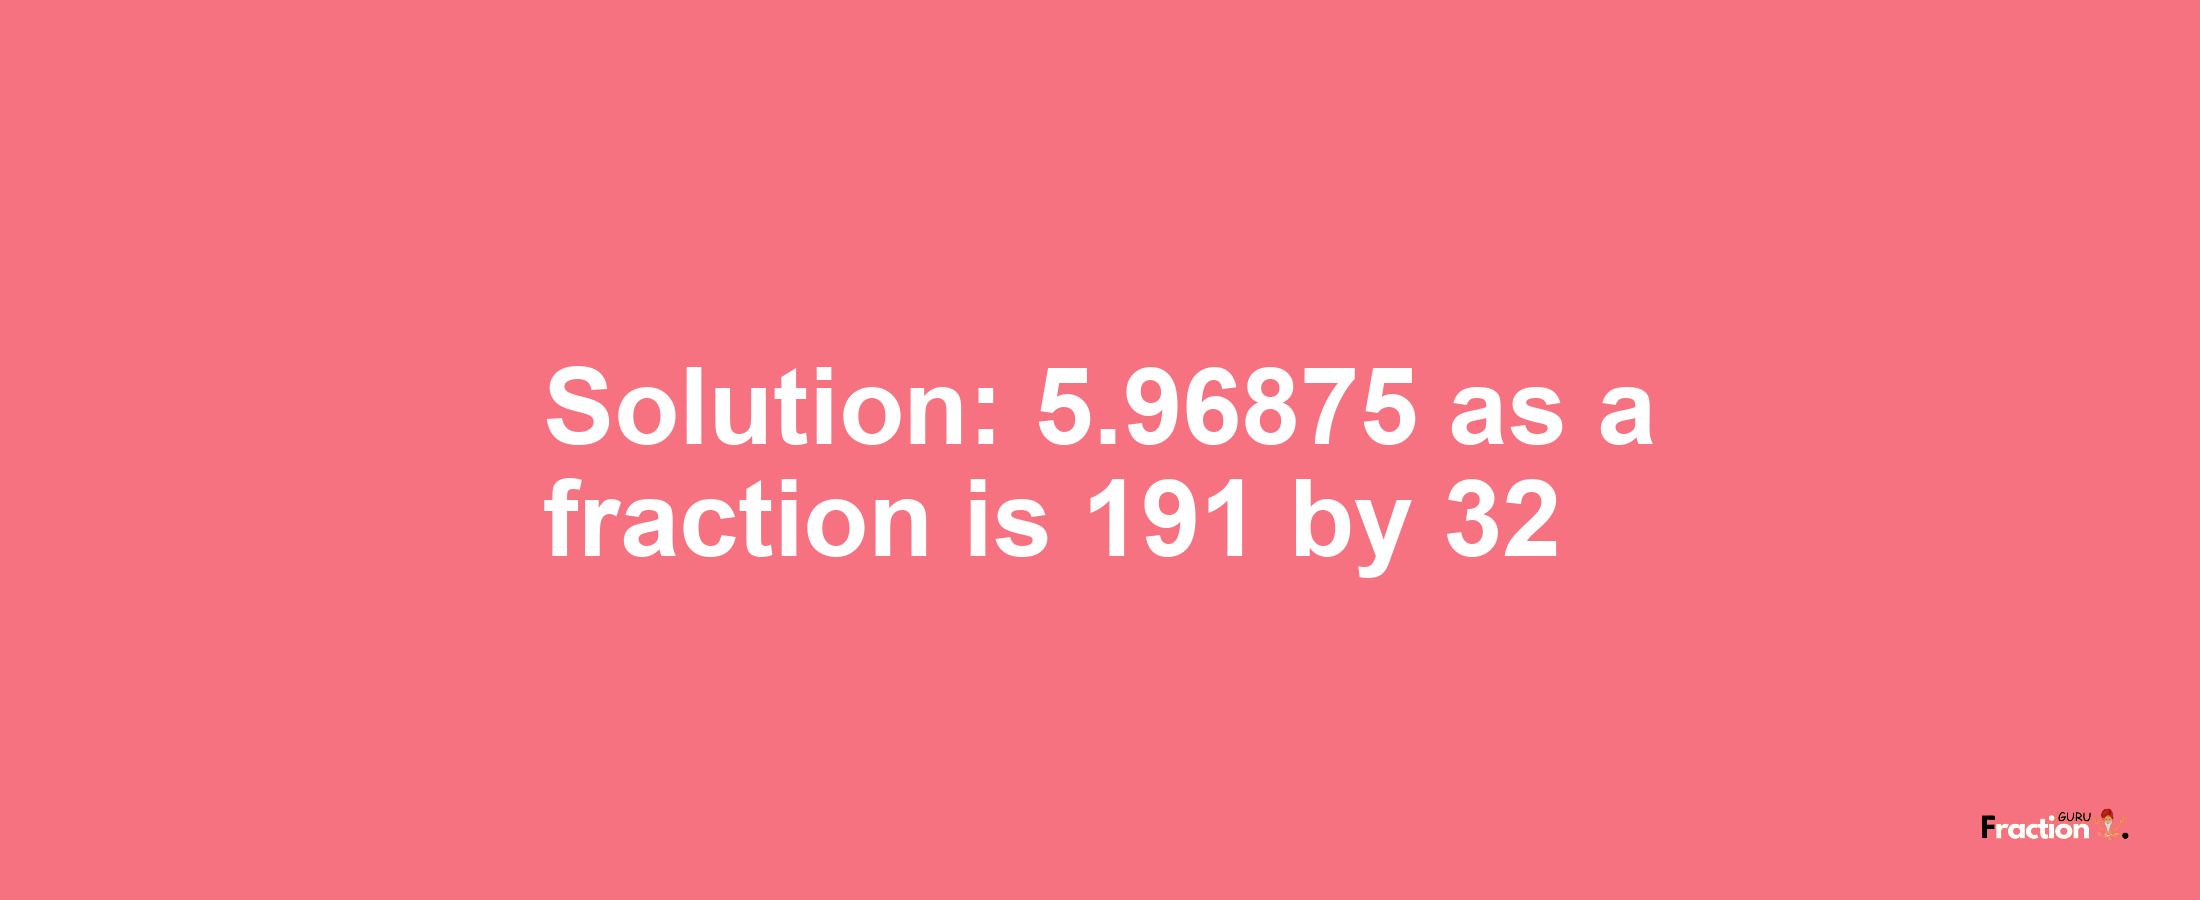 Solution:5.96875 as a fraction is 191/32